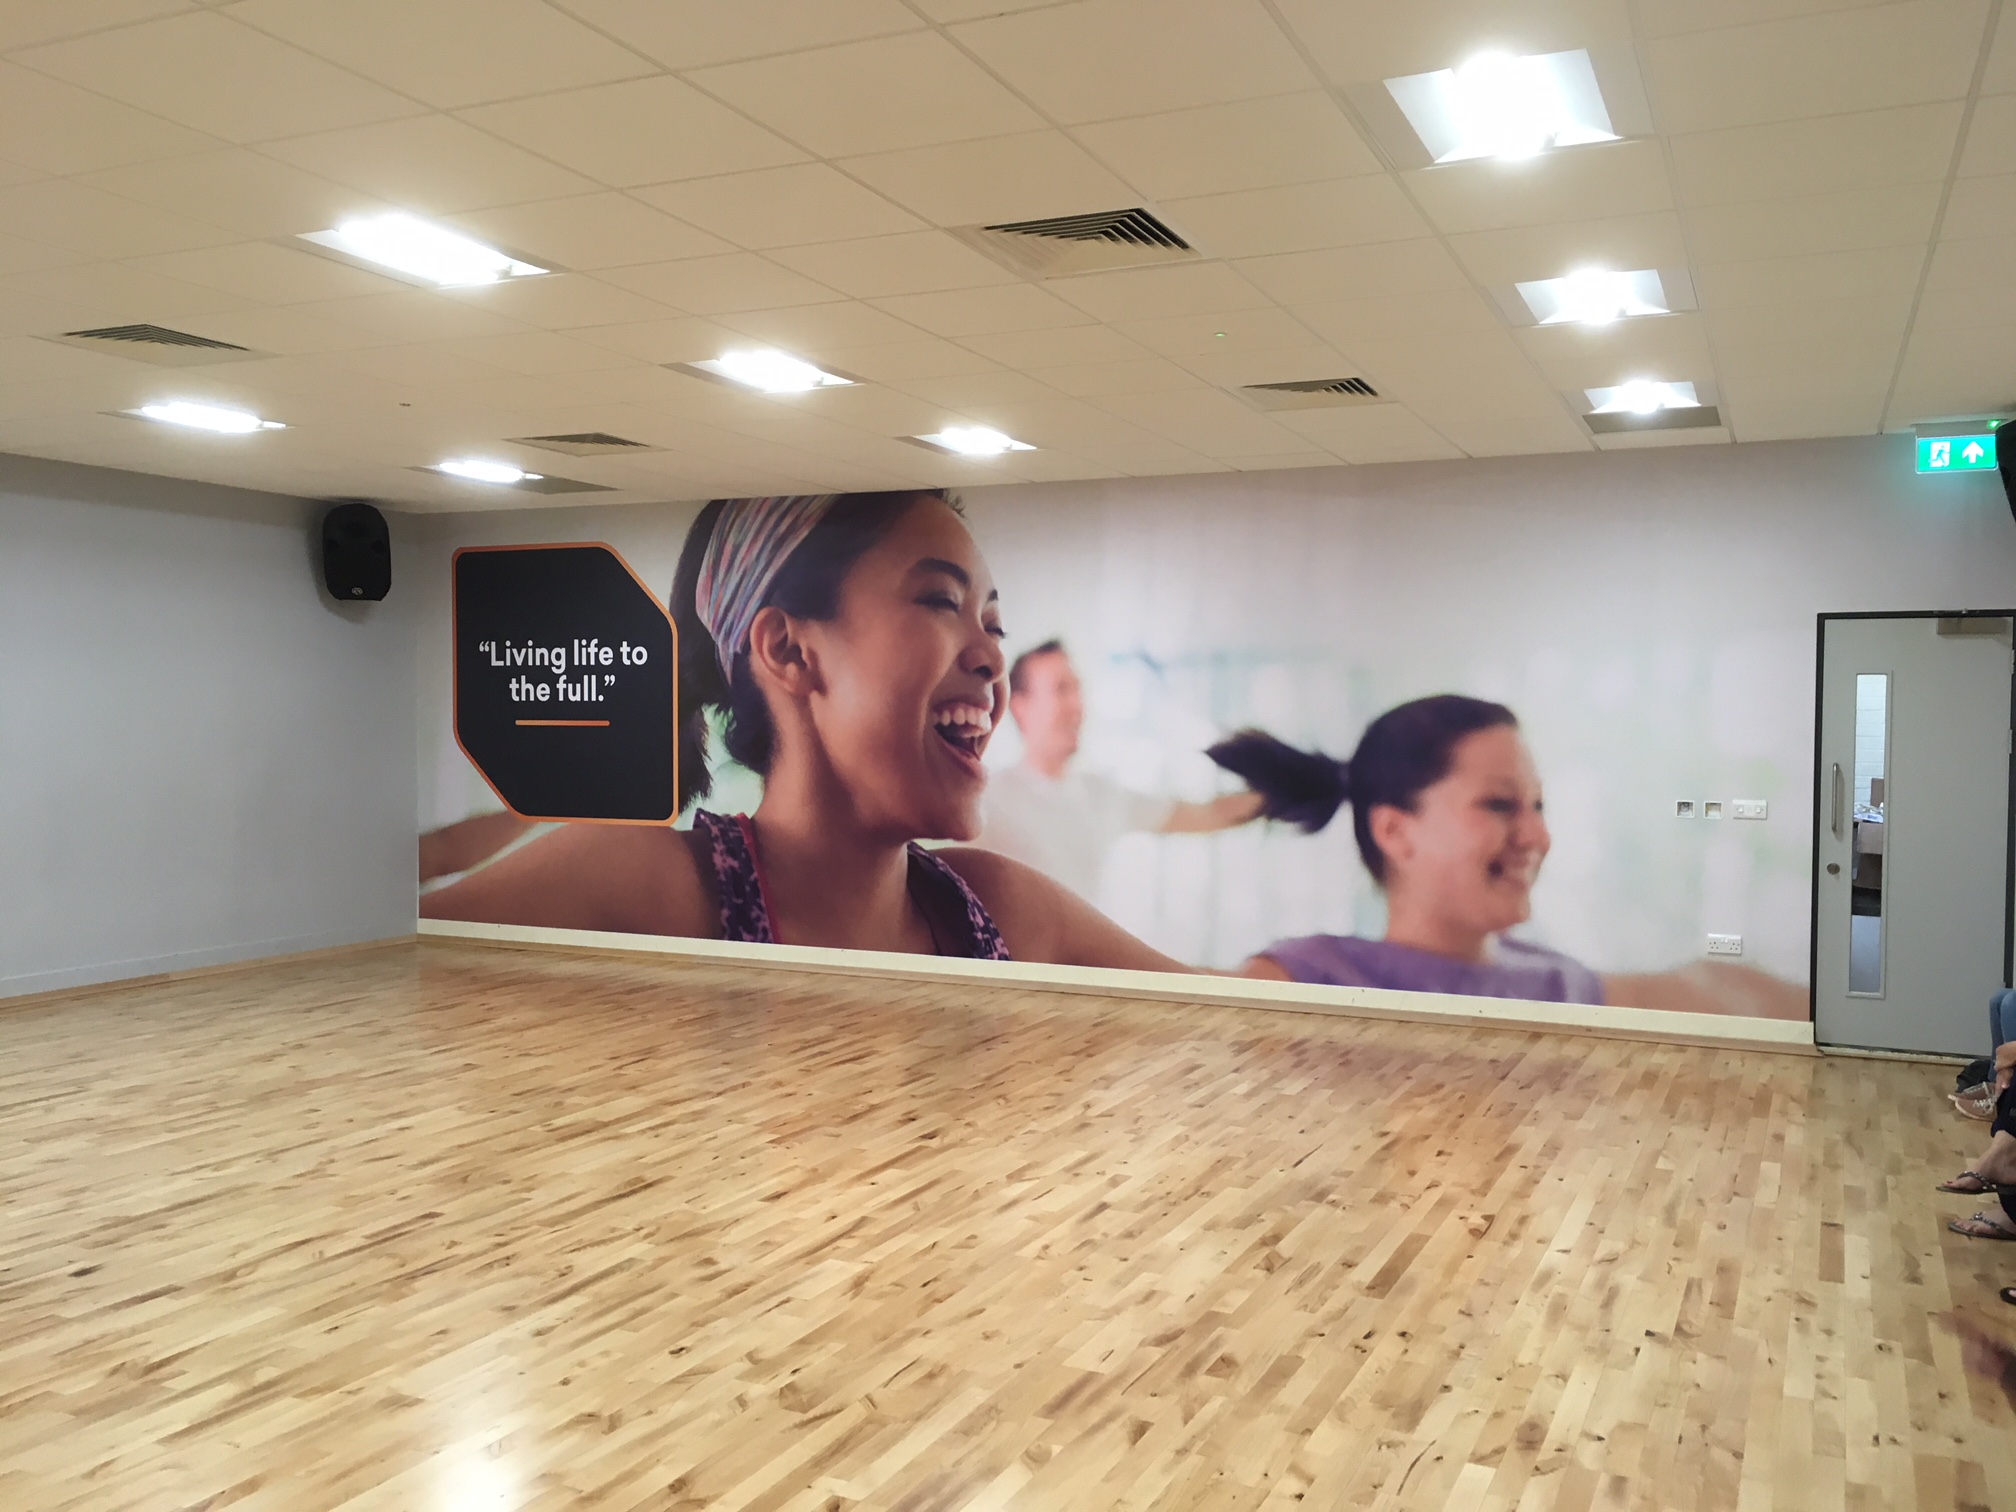 Studio at Epping Sports Centre Epping Sports Centre Epping 01992 565670